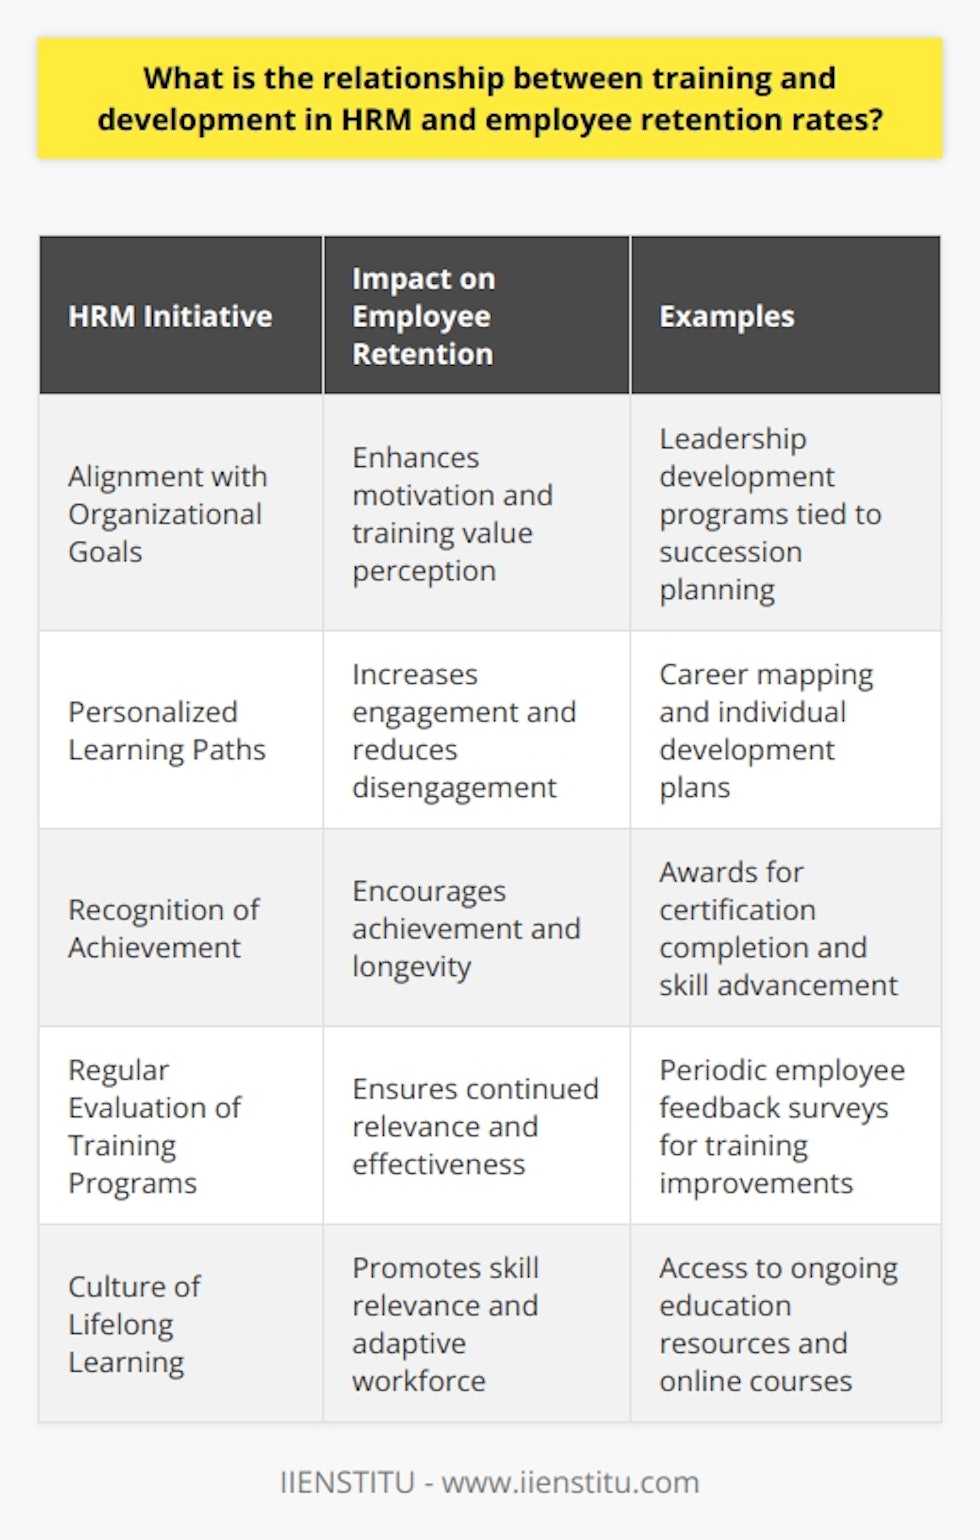 The interplay between training and development in Human Resource Management (HRM) and employee retention is a critical aspect of modern organizational strategy. Training and development serve as a cornerstone of HRM, with the objective of preparing employees to excel in their current roles and adapt to future challenges. This investment in employees can have a profound impact on retention, as it directly influences their engagement and commitment to the organization.Employee retention is paramount for companies eager to maintain a competitive edge. Excessive turnover is not just a financial burden due to recruitment and retraining costs but it also disrupts the continuity of service and erodes institutional memory. Creating a stimulating environment for employees is therefore a key HRM function, which can be greatly enhanced with effective training and development initiatives.Studies show that there's a positive correlation between the quality and quantity of training provided and employees’ intent to stay within an organization. Training gives employees a sense of value while development opportunities signal to them a prospect of career progression. When these factors are absent, employees may feel stagnant, undervalued, and more open to external opportunities.A prime example of the role HRM plays in retention is seen in identifying and addressing the specific training needs of varying employee demographics. Younger employees, for example, may place a higher emphasis on career development programs as a retention tool compared to other incentives.Quality training and development foster an environment that is conducive to employee growth, creating a workforce that is not only well-equipped to meet the demands of their job but also more satisfied and engaged. These contented employees are less likely to seek alternative employment, reducing turnover, and improving the overall stability of the workforce.Furthermore, in the context of an increasingly digital work environment, HRM's approach to training and development must evolve. For instance, providing access to online courses and virtual training sessions can be an effective strategy to accommodate different learning styles and schedules.For organizations looking to improve their retention rates, HRM should:1. Ensure alignment of training and development programs with both organizational objectives and individual career goals. This alignment boosts employee motivation and the perceived value of training.2. Personalize learning and development pathways. A one-size-fits-all approach can lead to disengagement.3. Create a supportive environment that celebrates achievement and progression following training. Recognition can reinforce positive outcomes and encourage longevity.4. Evaluate training programs regularly to ensure they remain relevant and effective. Feedback loops are essential in understanding the impact of training on performance and satisfaction.5. Promote a culture of lifelong learning to help employees maintain the relevance of their skills in an ever-changing business landscape.Organizations that integrate a strategic view of training and development within their HRM framework are more likely to enjoy elevated employee retention rates. The connection between the two is one of mutual reinforcement – as employees grow and develop, so too does their commitment to the organization that invested in their future. This synergy between capacity-building and retention scores a win-win for both employers seeking to preserve their human capital and for employees in pursuit of personal and professional development.